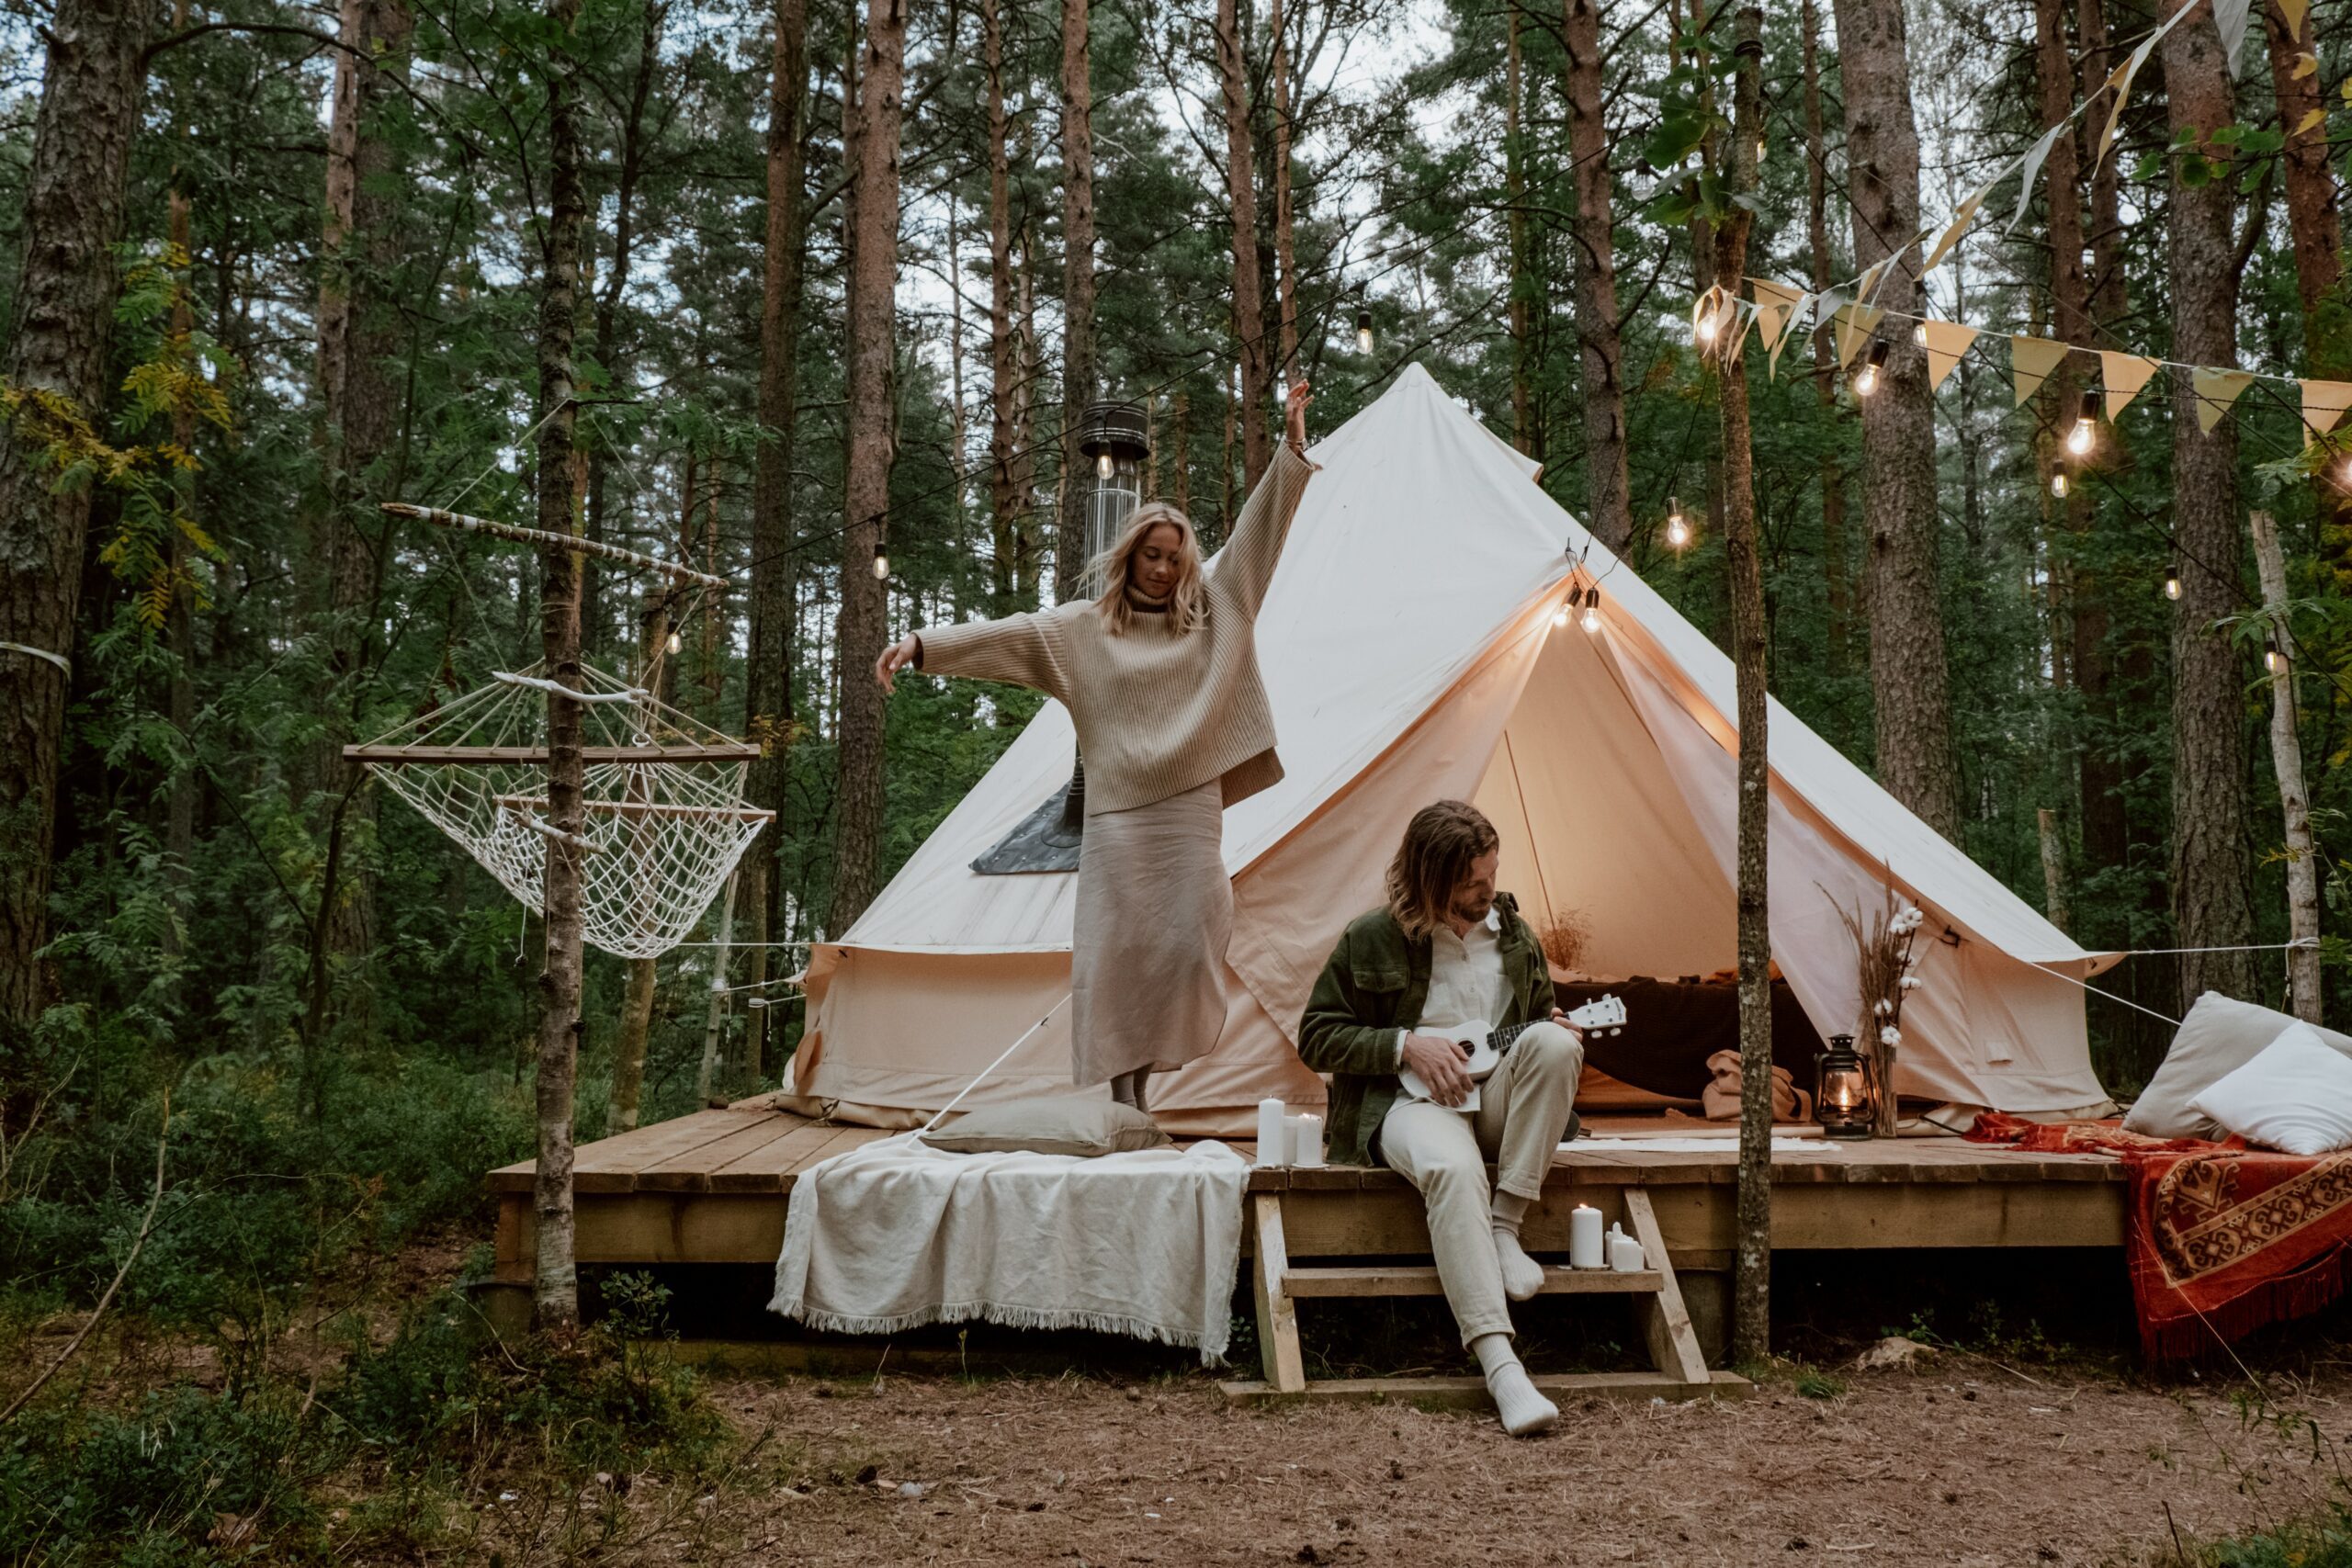 How to Start a Glamping Business in 2023: The Essential Guide for Vacation Rental Operators